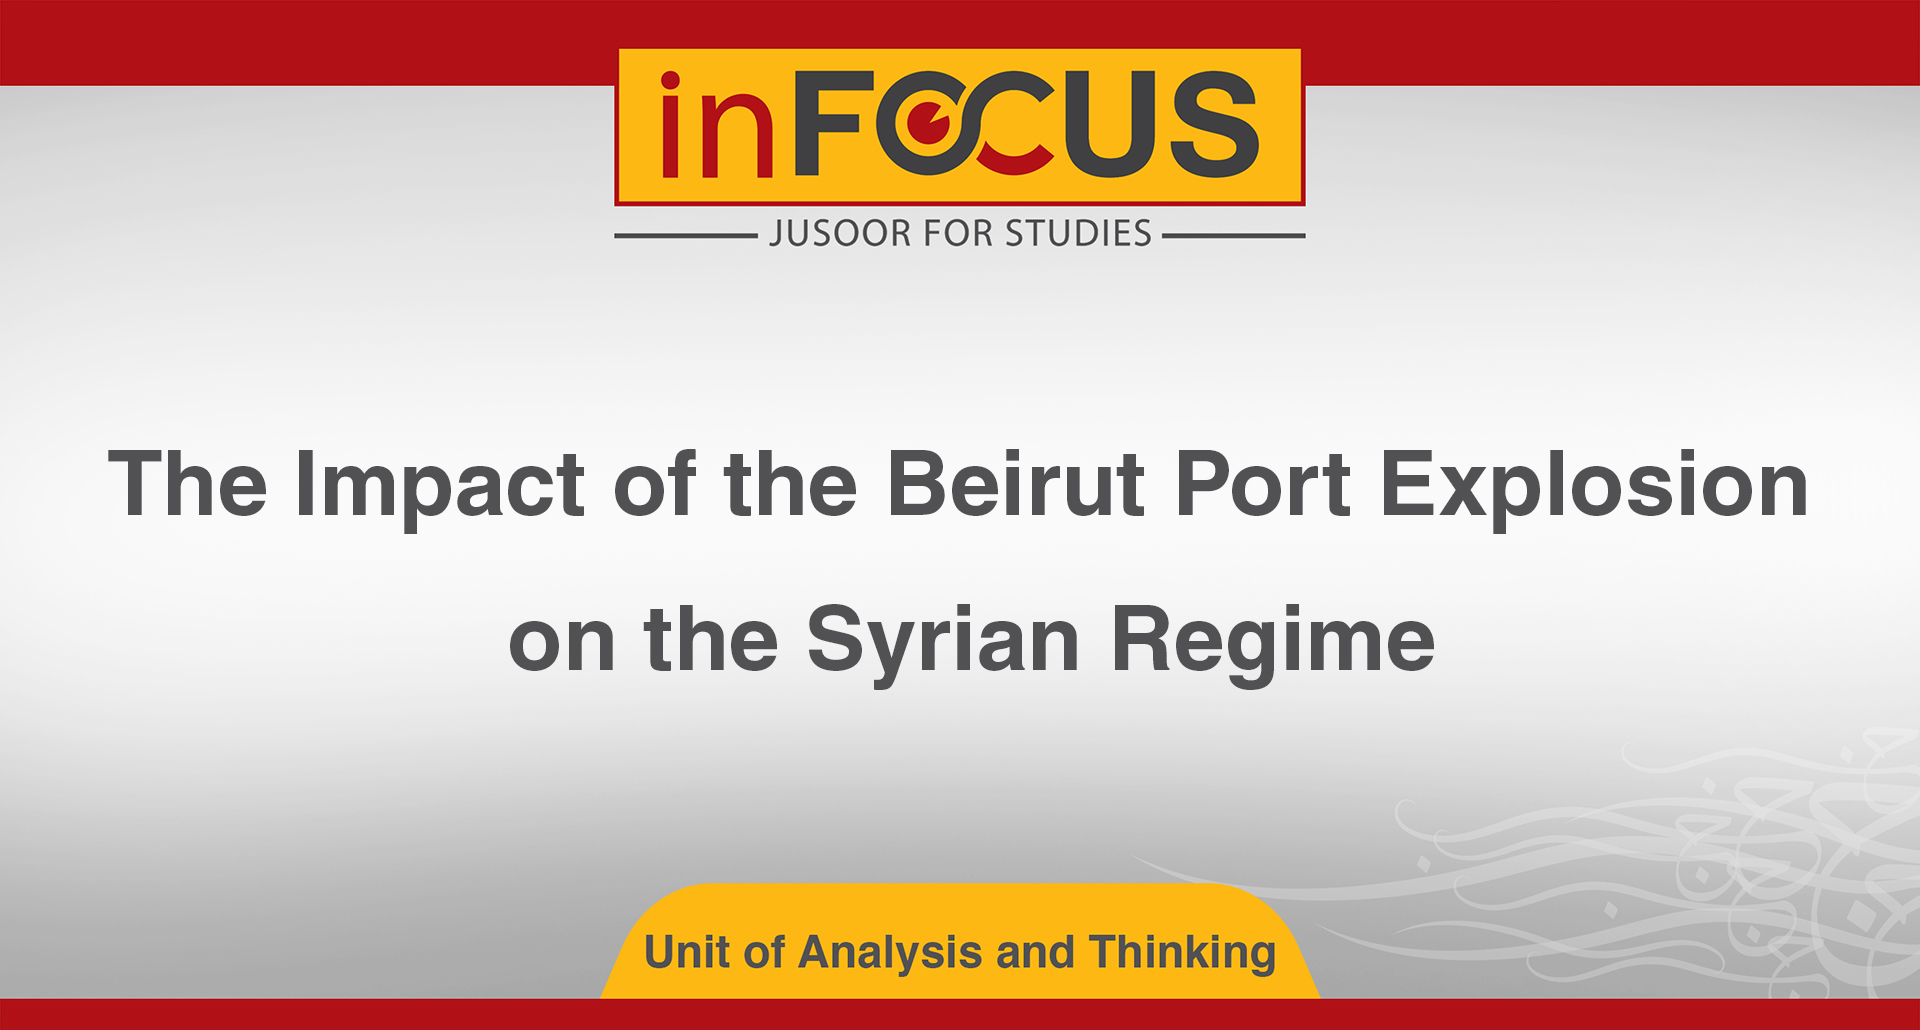 The Impact of the Beirut Port Explosion on the Syrian Regime